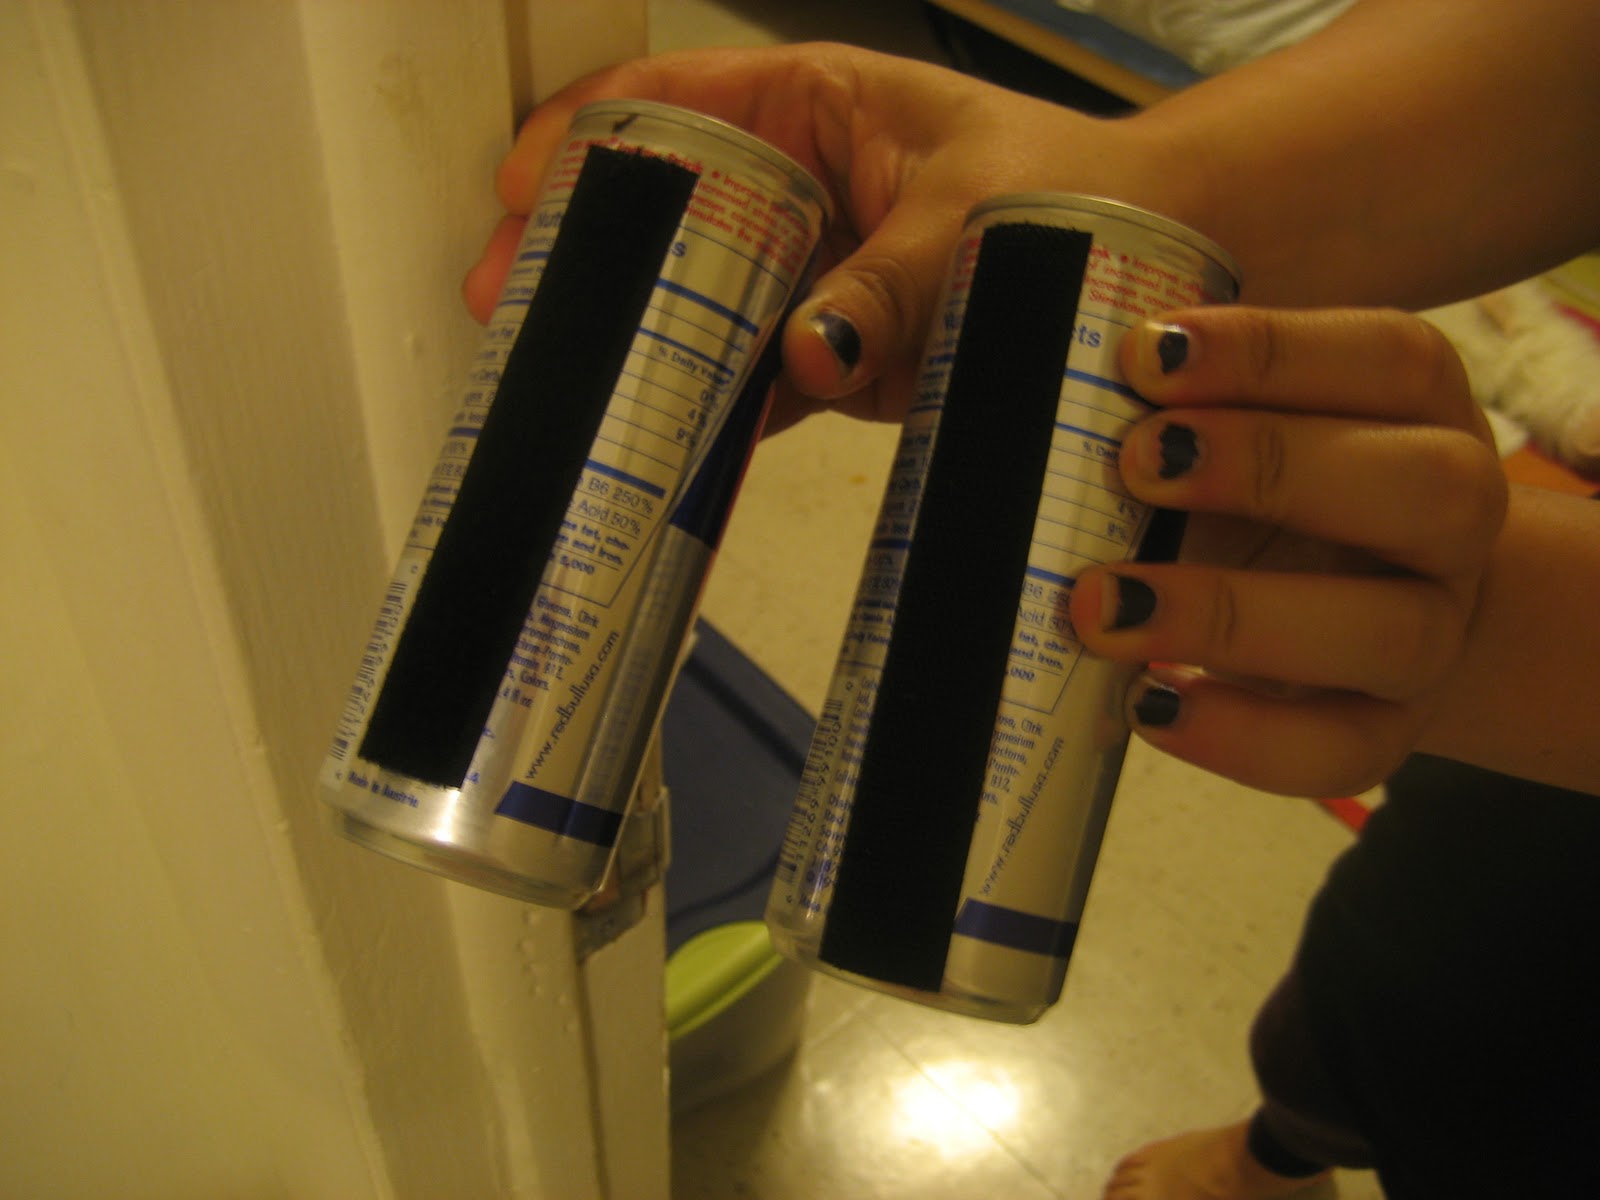 mini cans of Red Bull